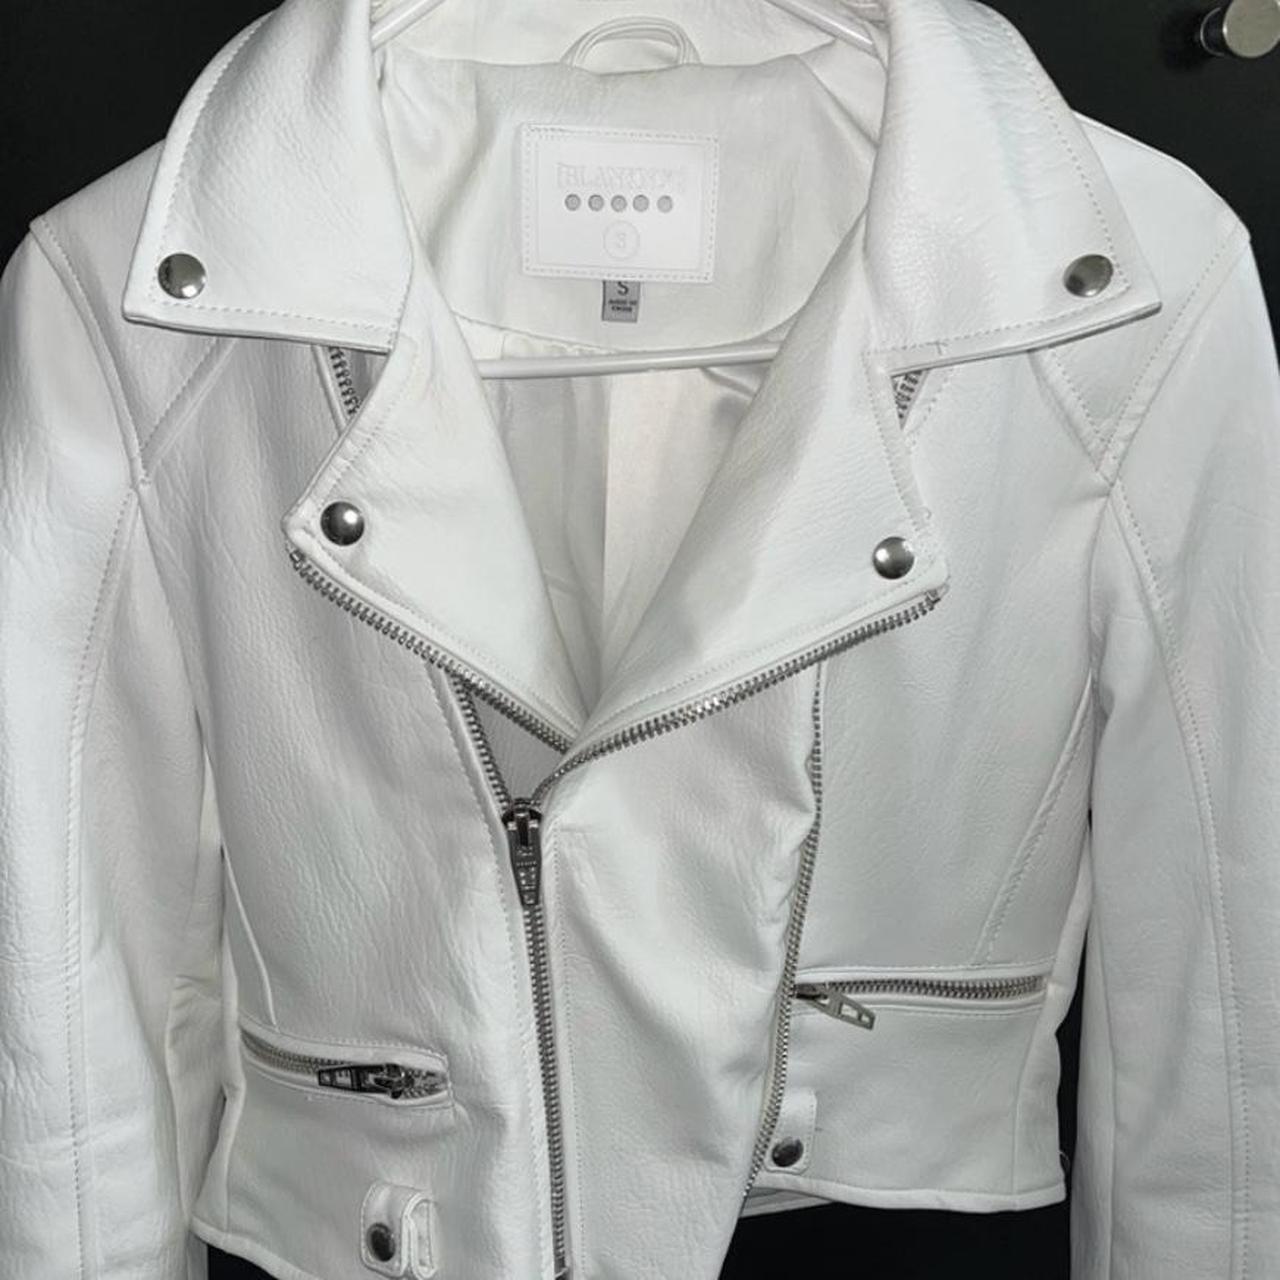 Blank NYC Women's White and Silver Jacket | Depop